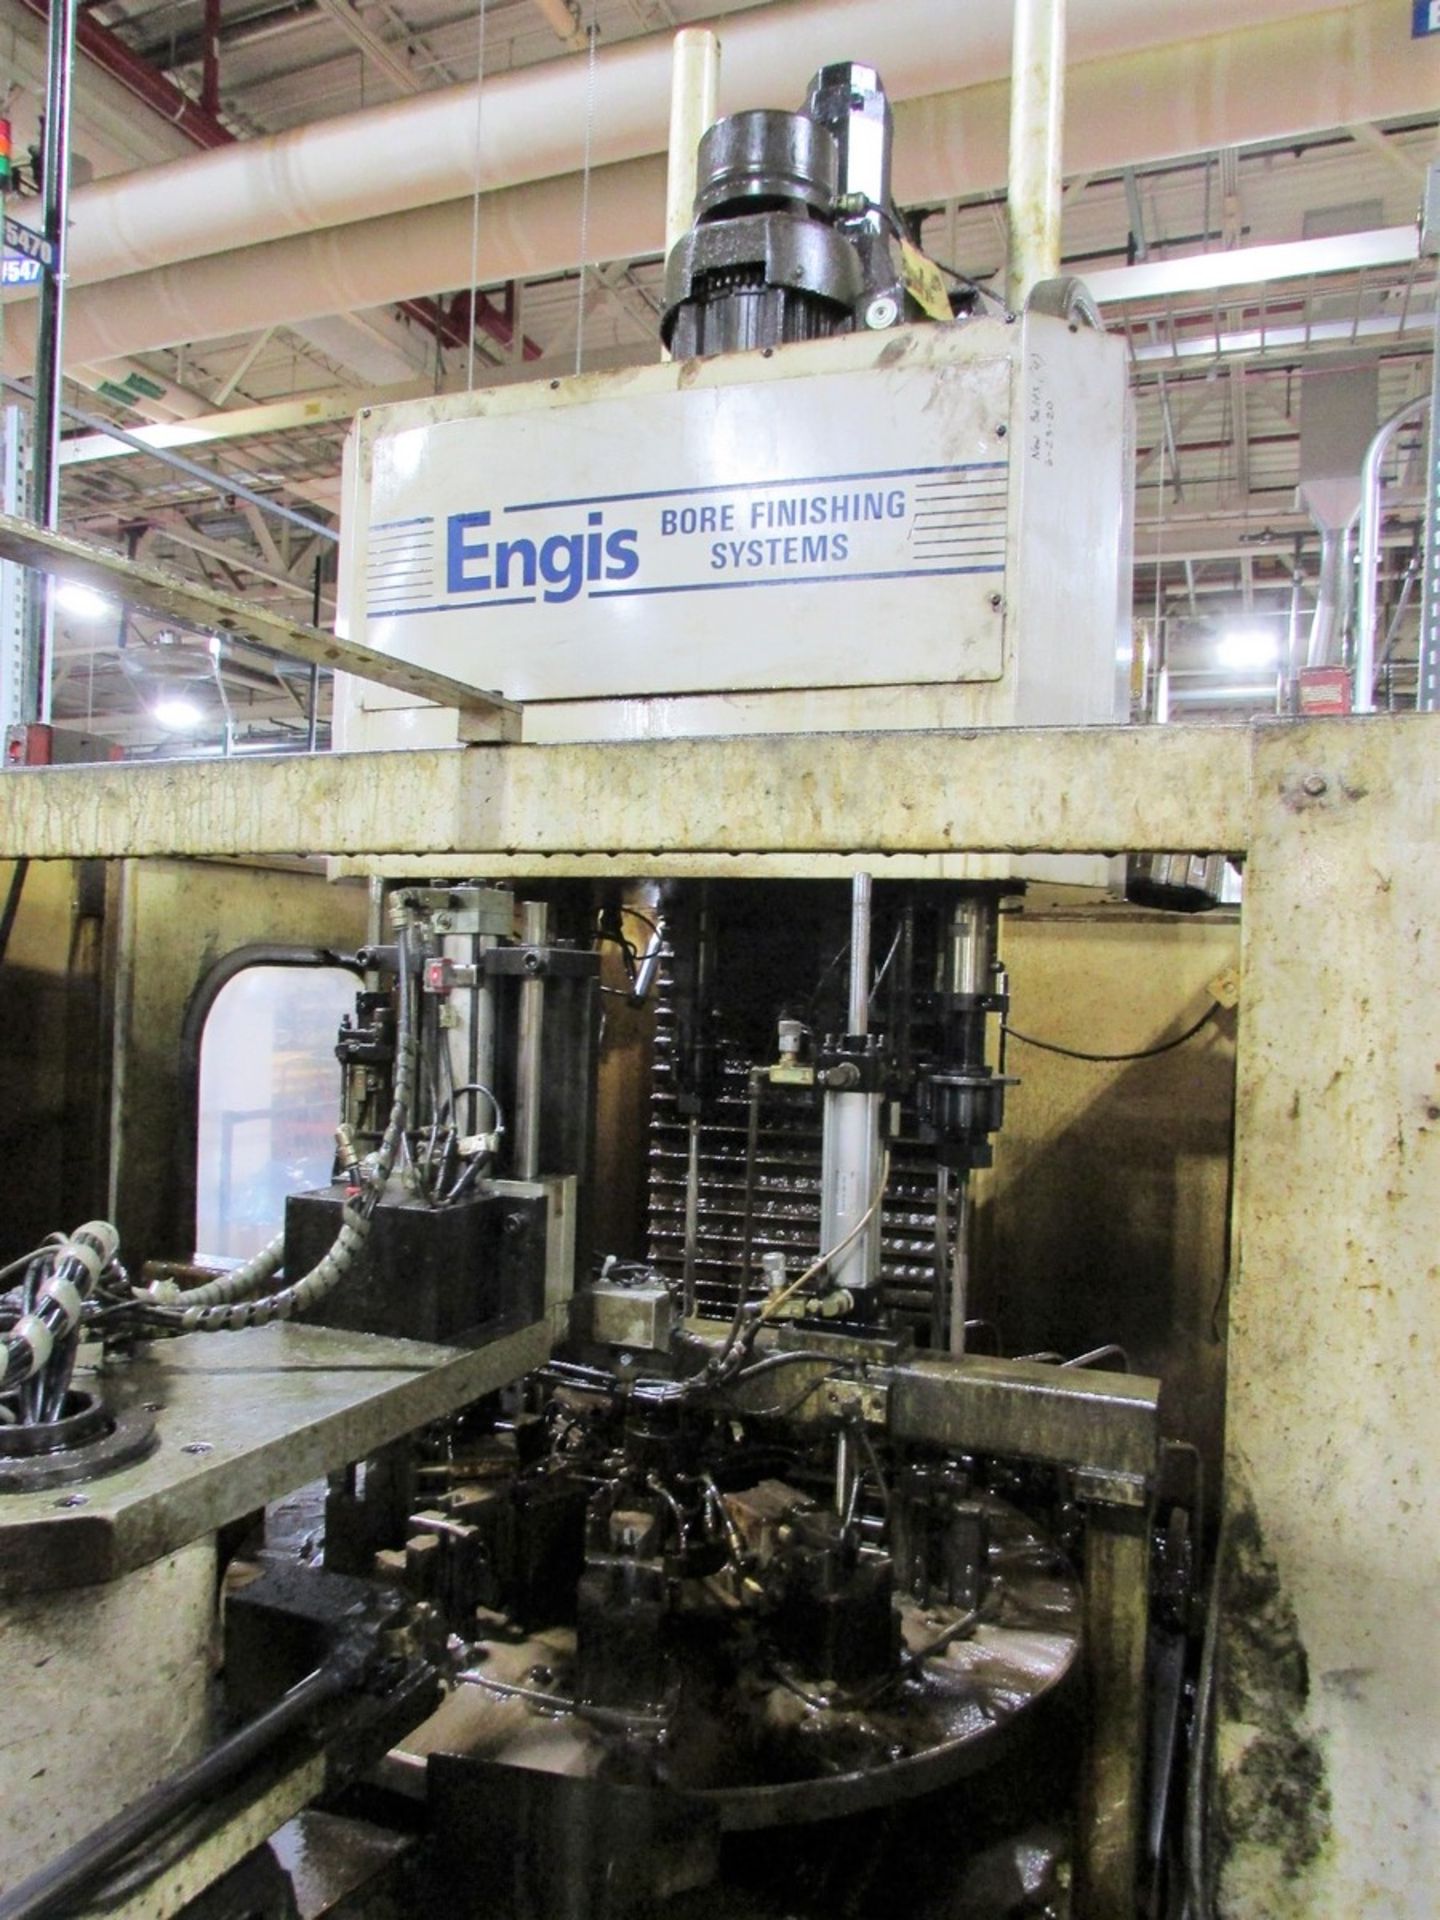 Universal Automatic Machine/ Engis Bore Finishing Systems 9825 16S 6-Spindle Single Column Vertical - Image 2 of 17